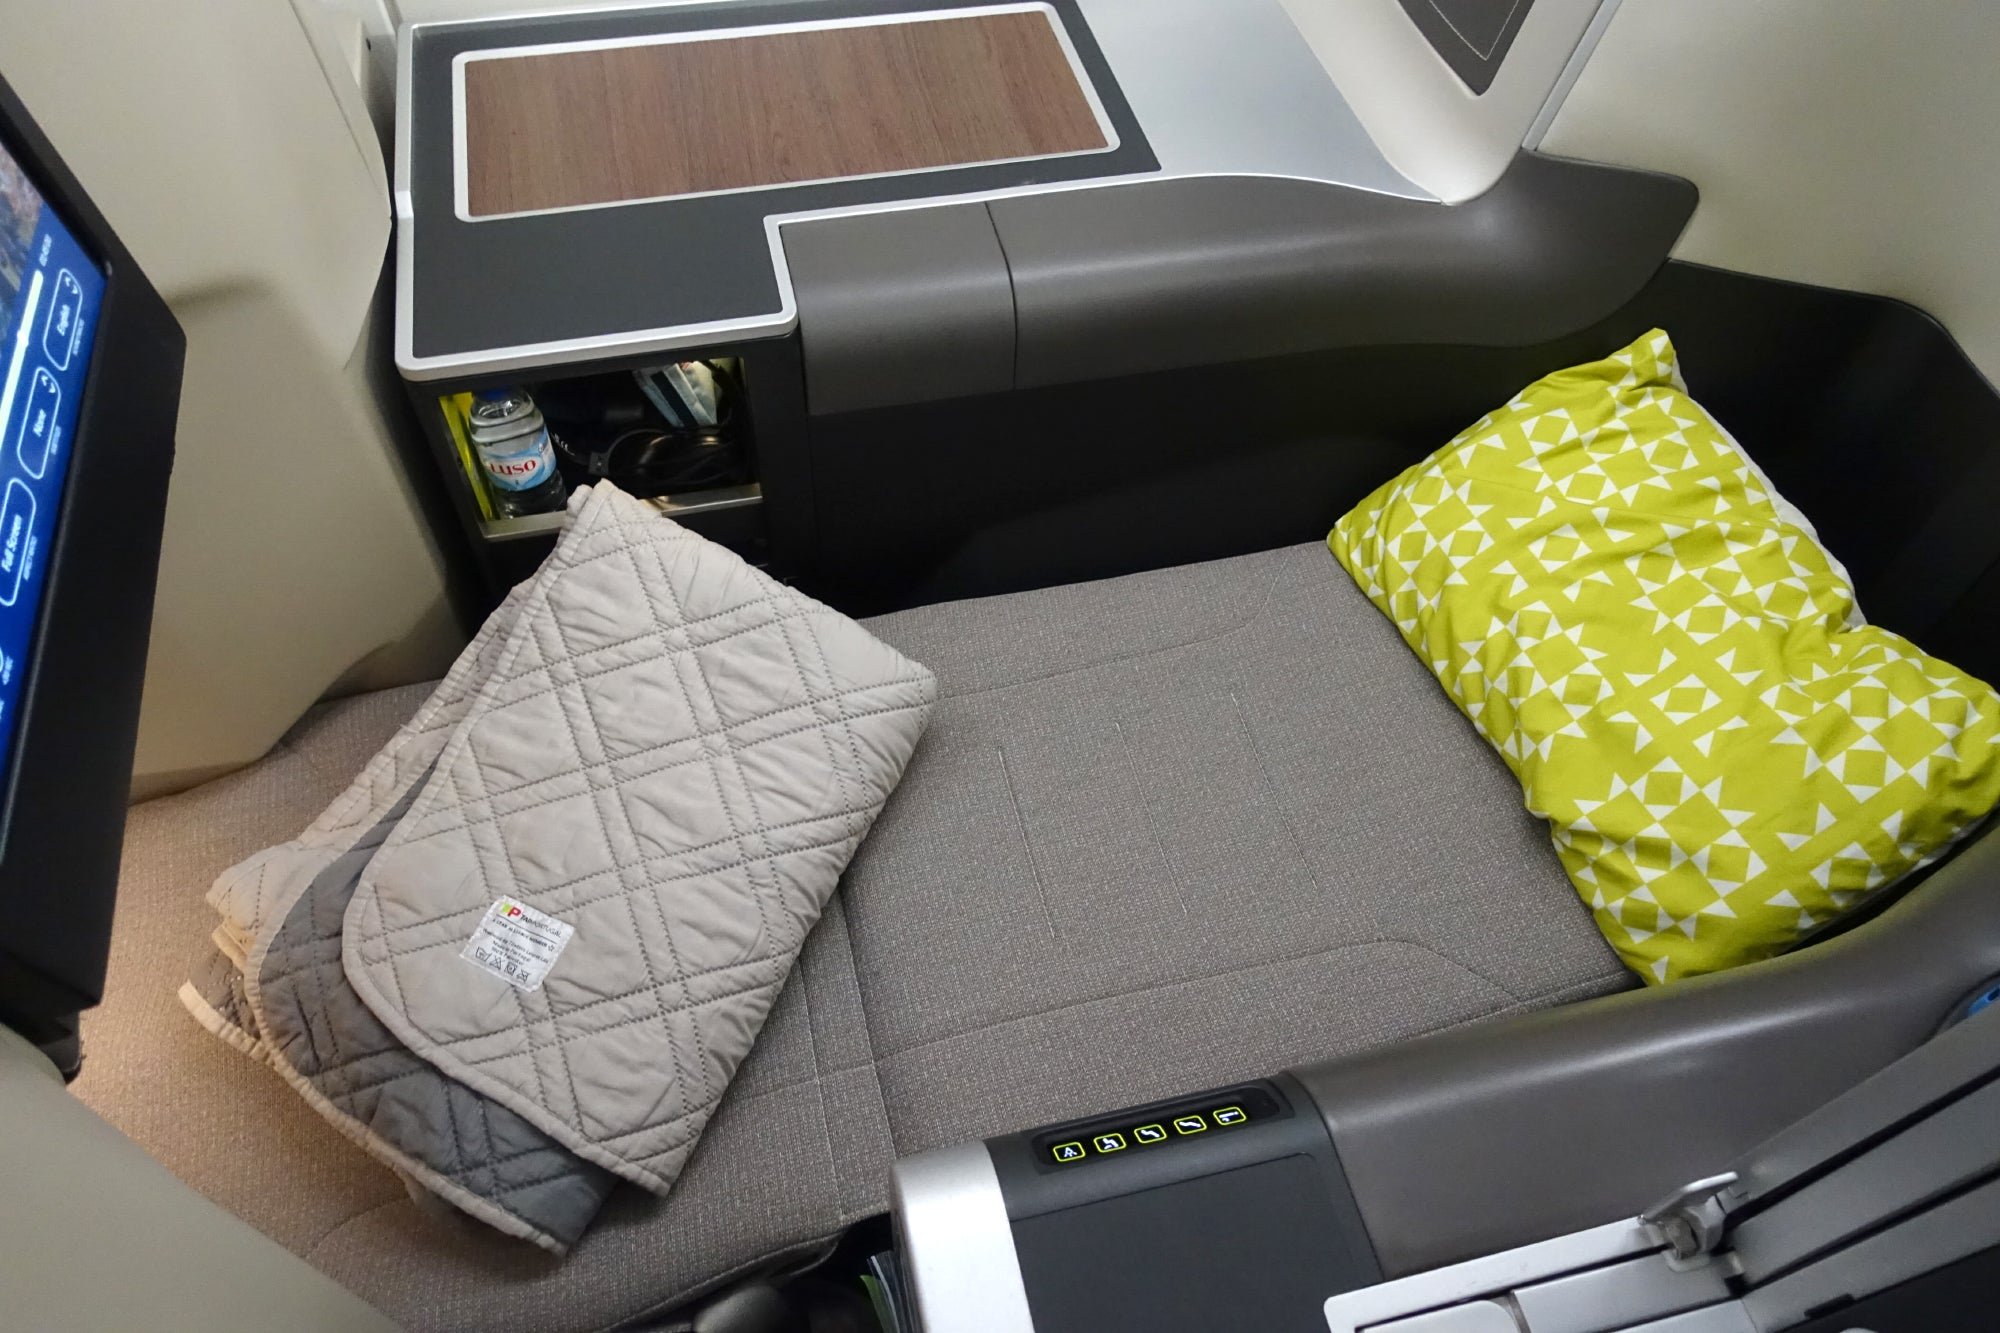 TAP Portugal A330 Business Review